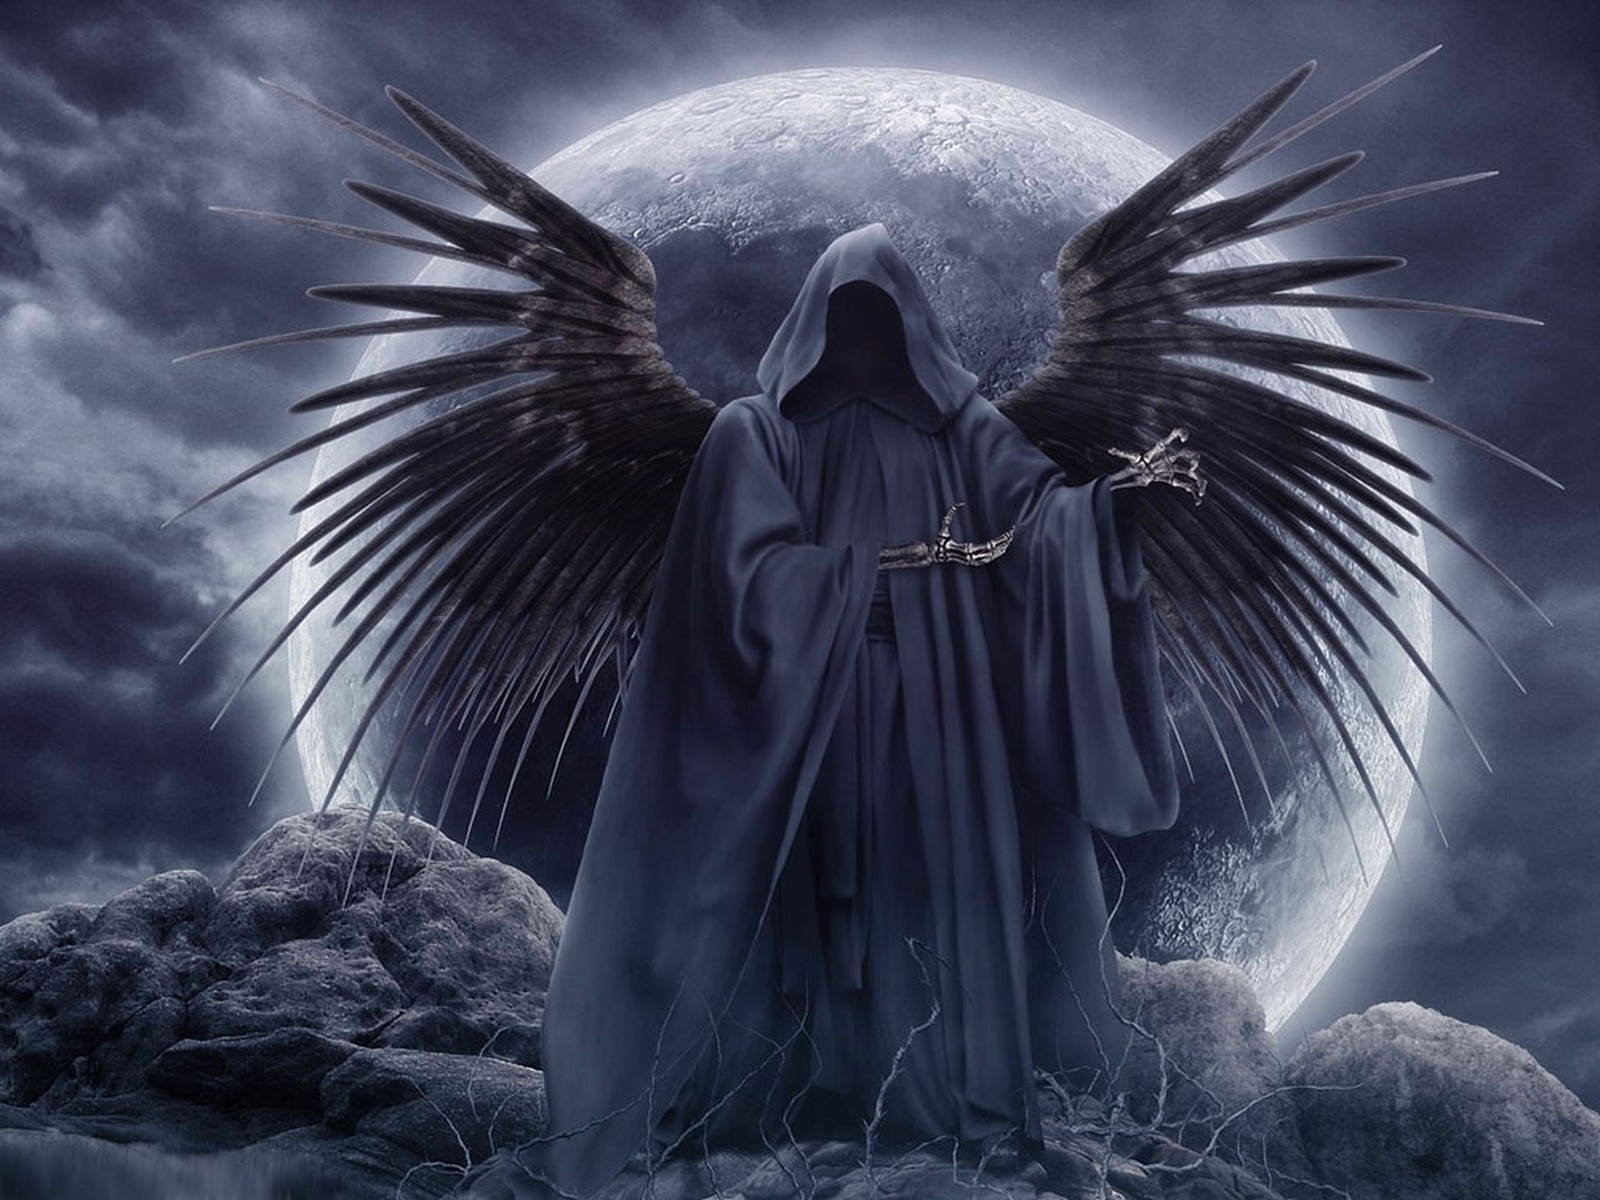 death angel wallpaper from angels wallpapers